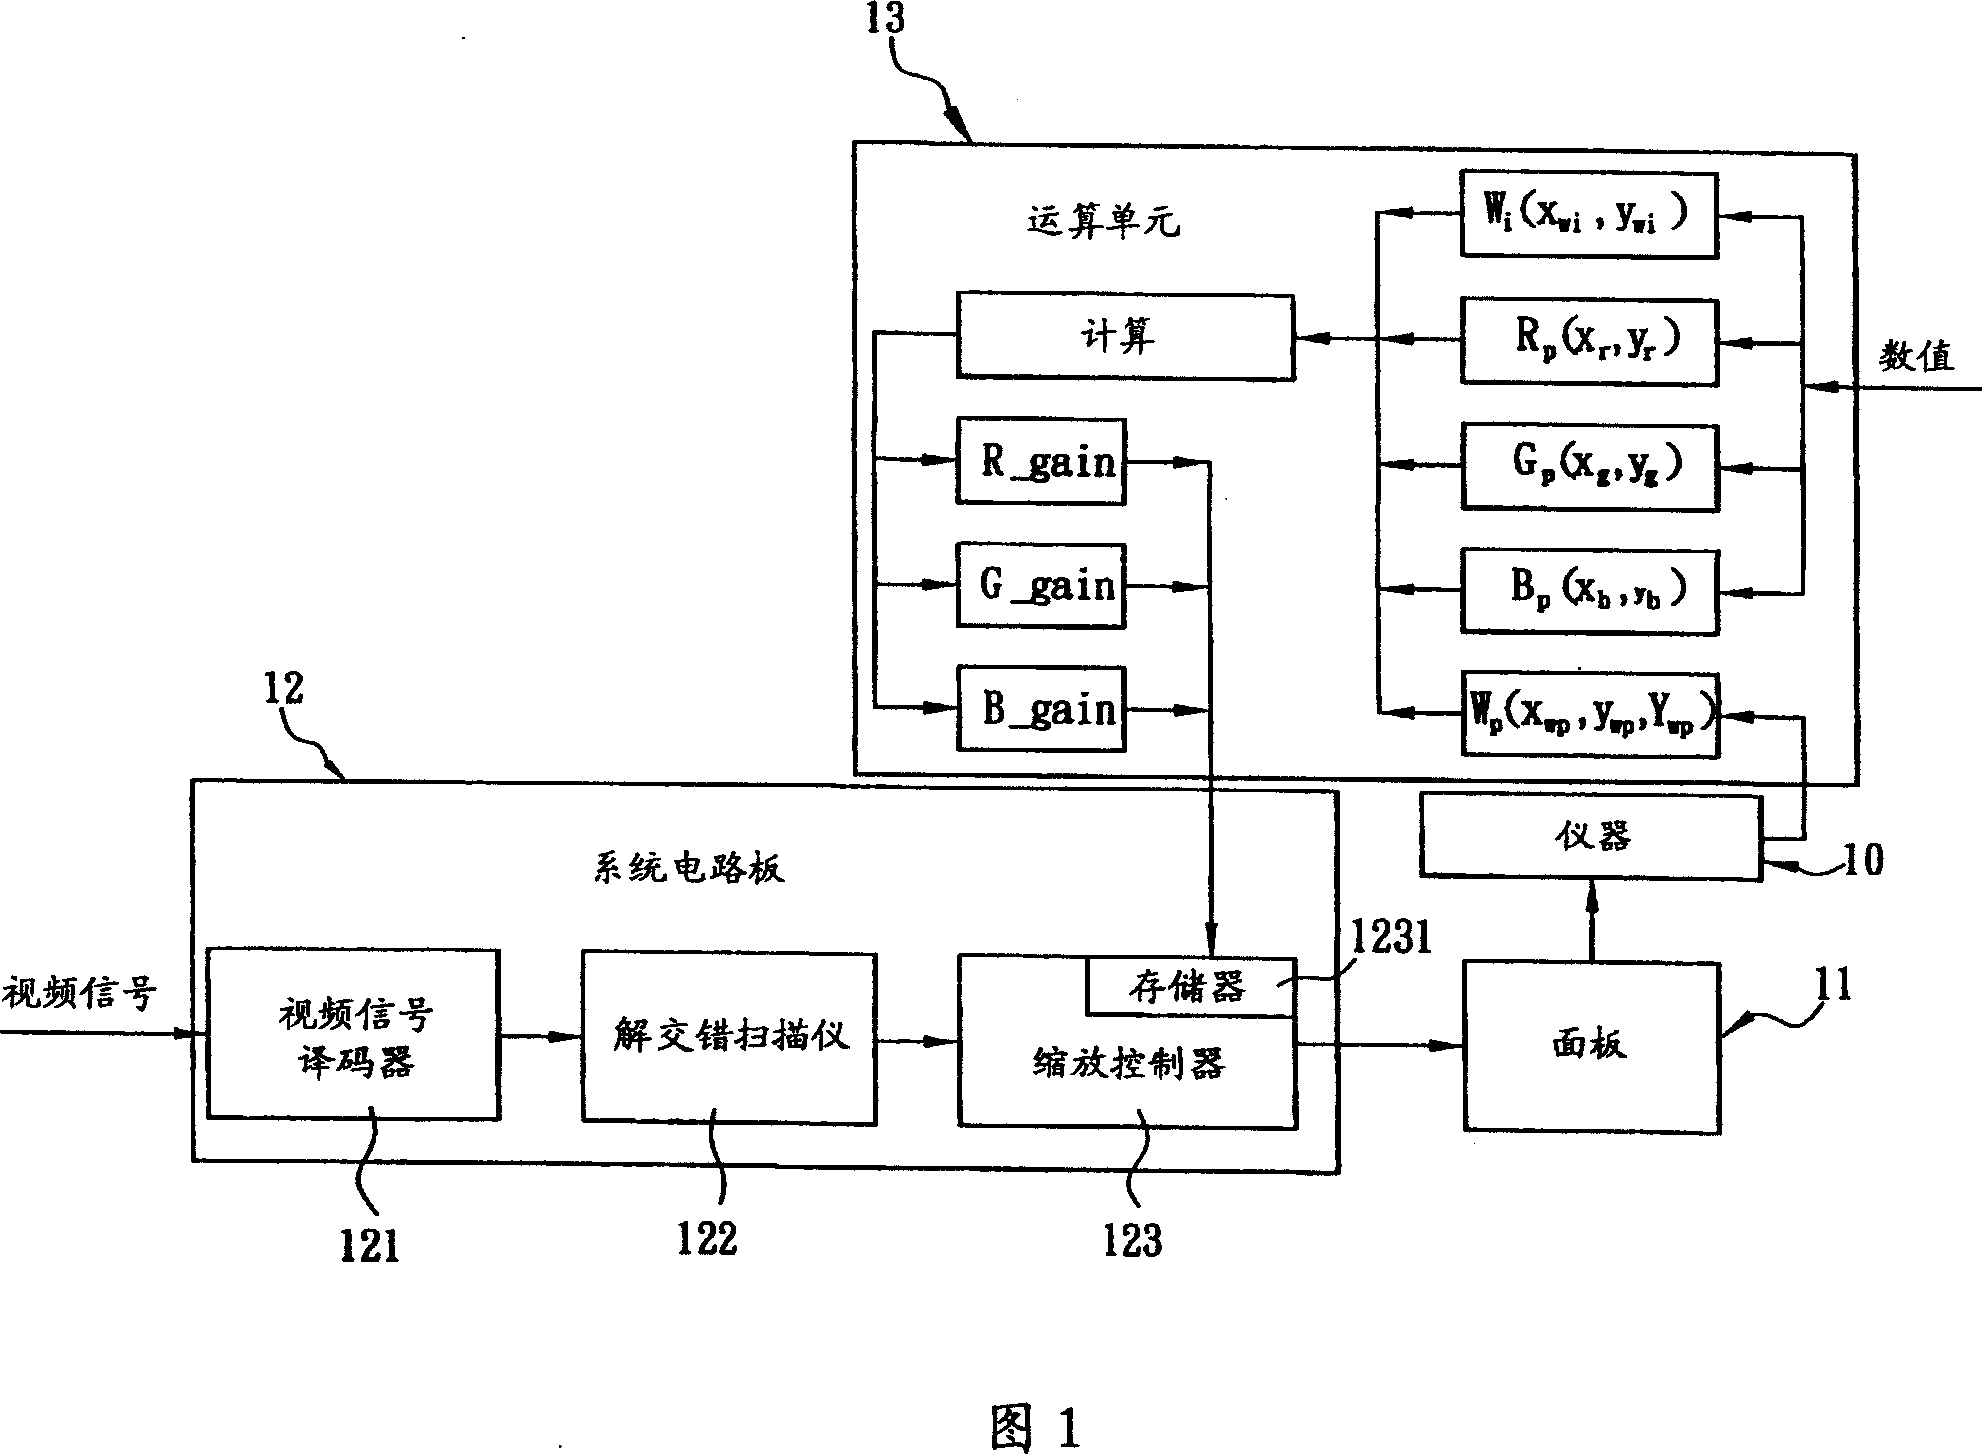 Method and system for automatic measuring and regulating gray level white balance of display apparatus